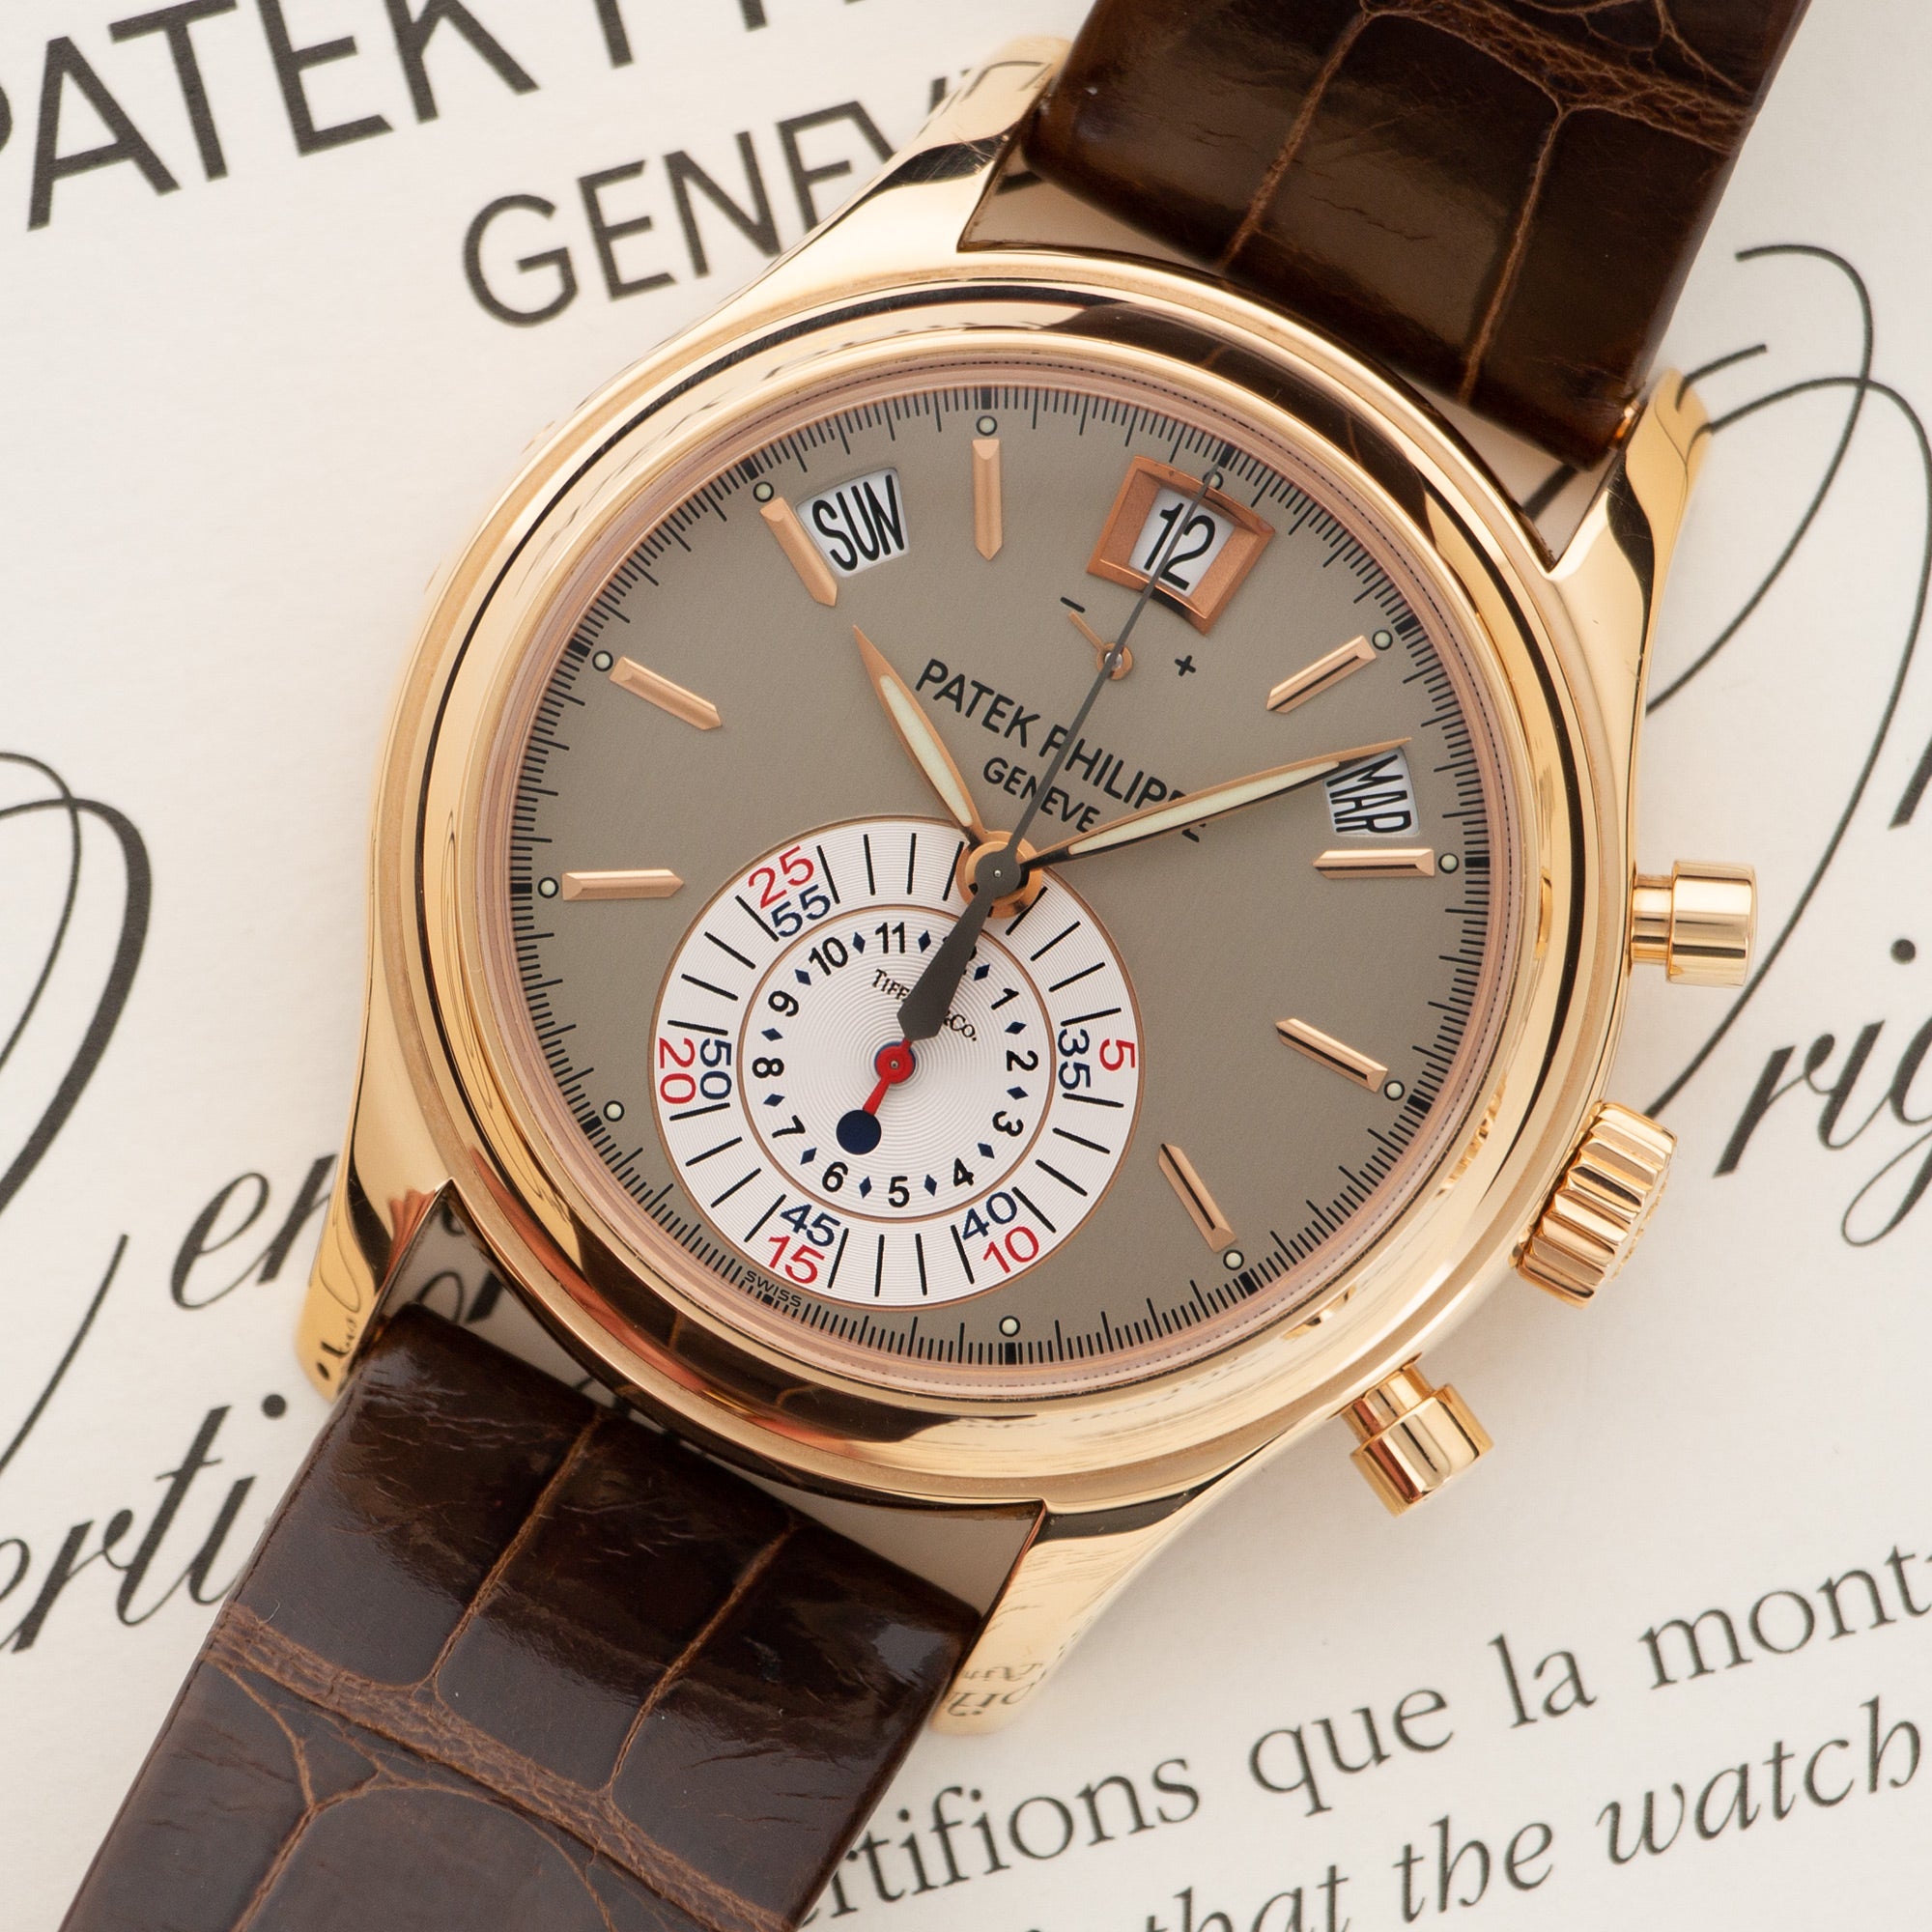 Patek Philippe - Patek Philippe Annual Calendar Chronograph Watch Ref. 5960, Retailed by Tiffany & Co. - The Keystone Watches